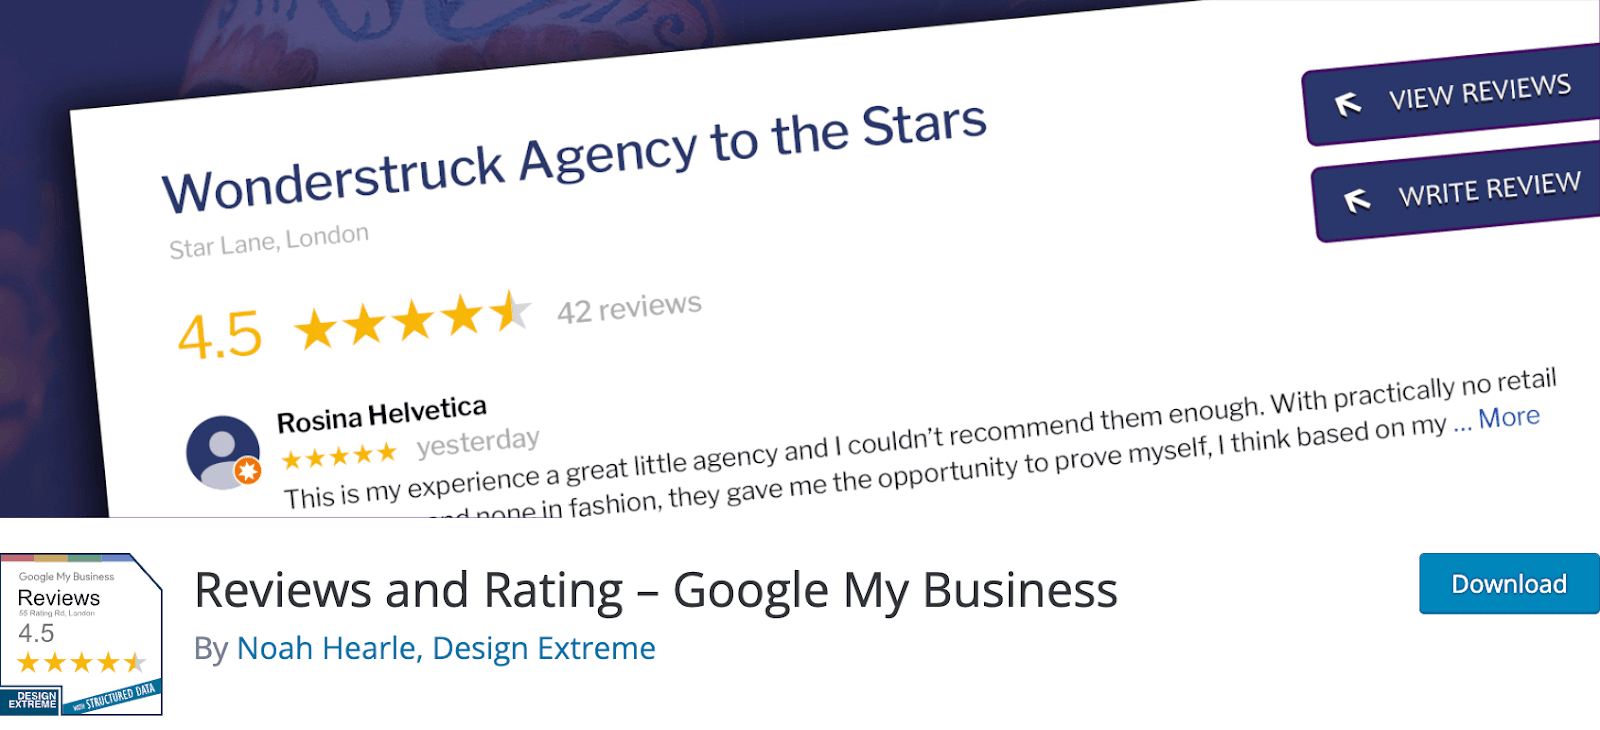 Reviews and Rating plugin for WordPress websites